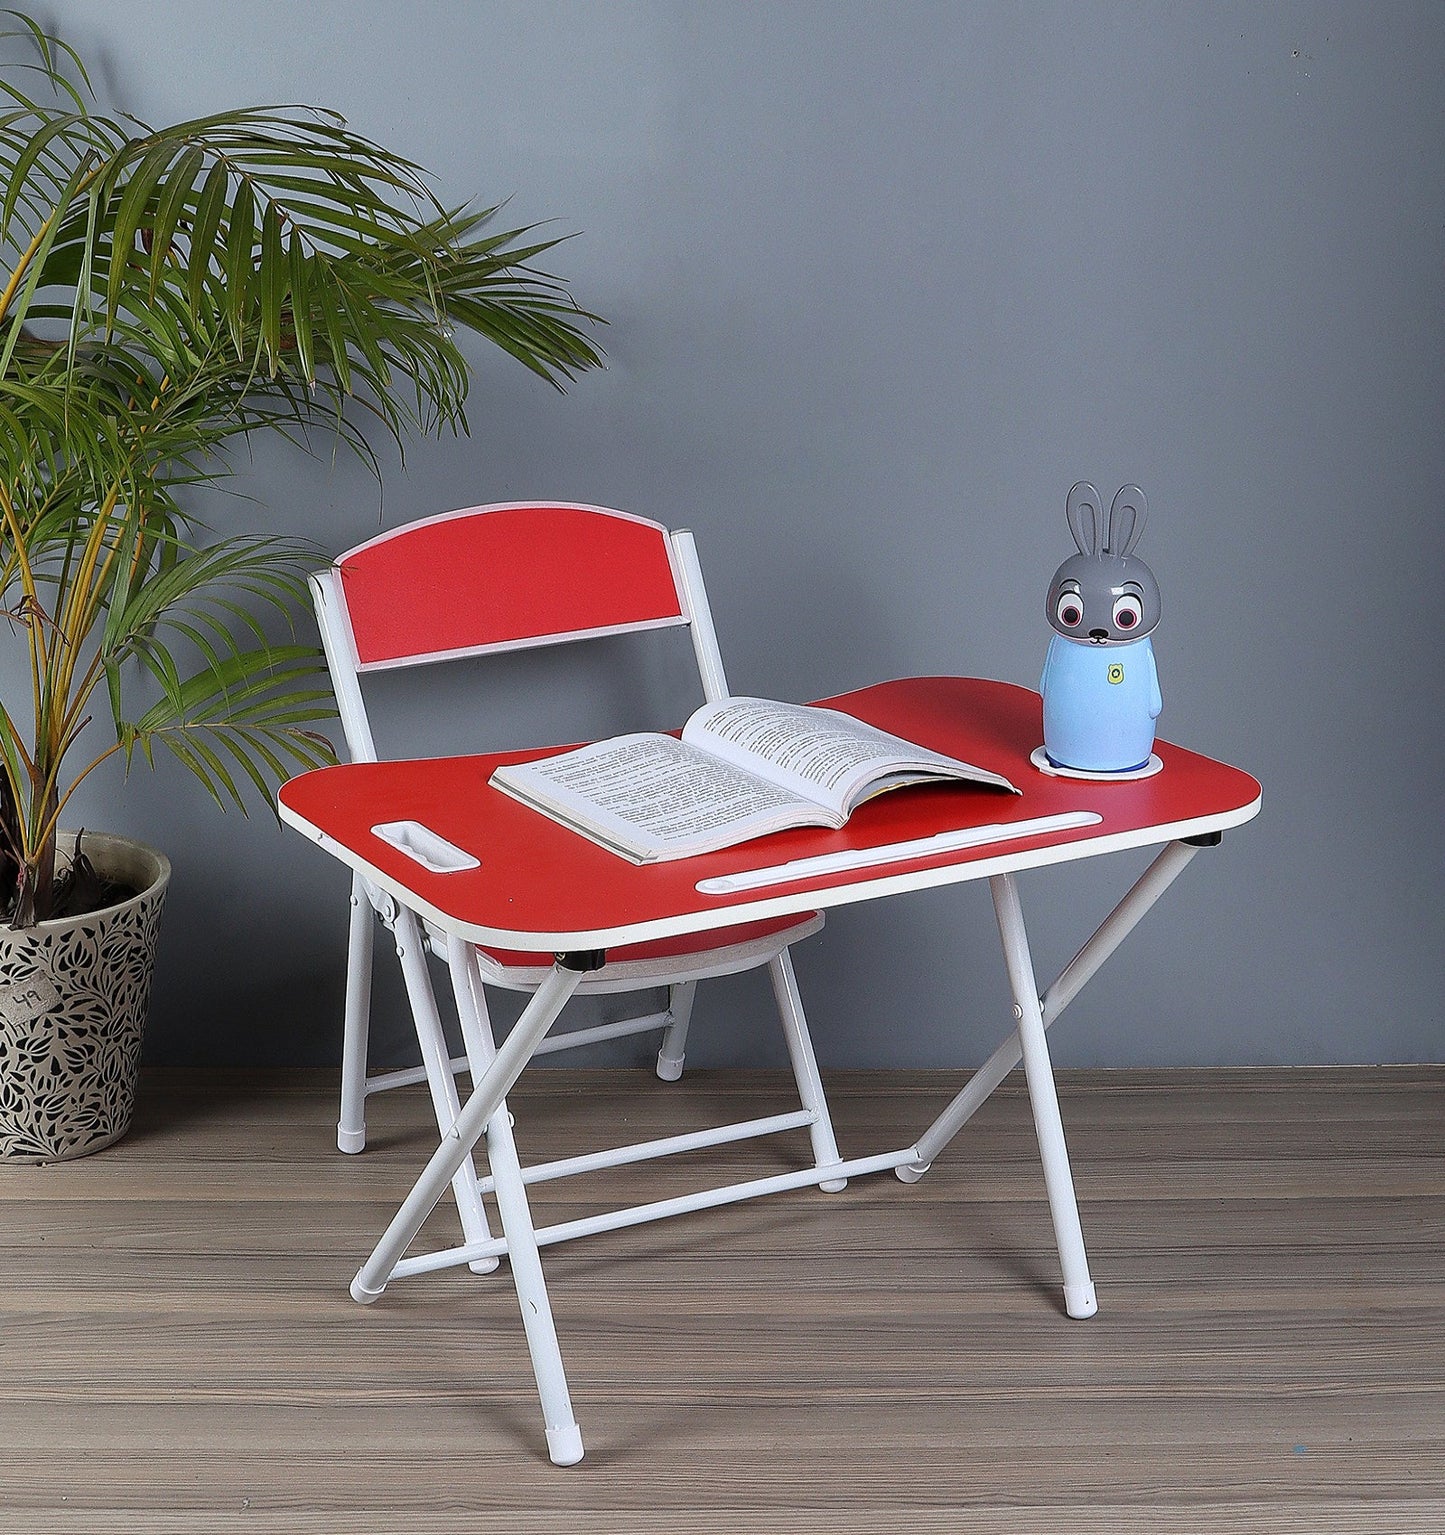 Foldable Table Chair Set Red (3-6 yrs)